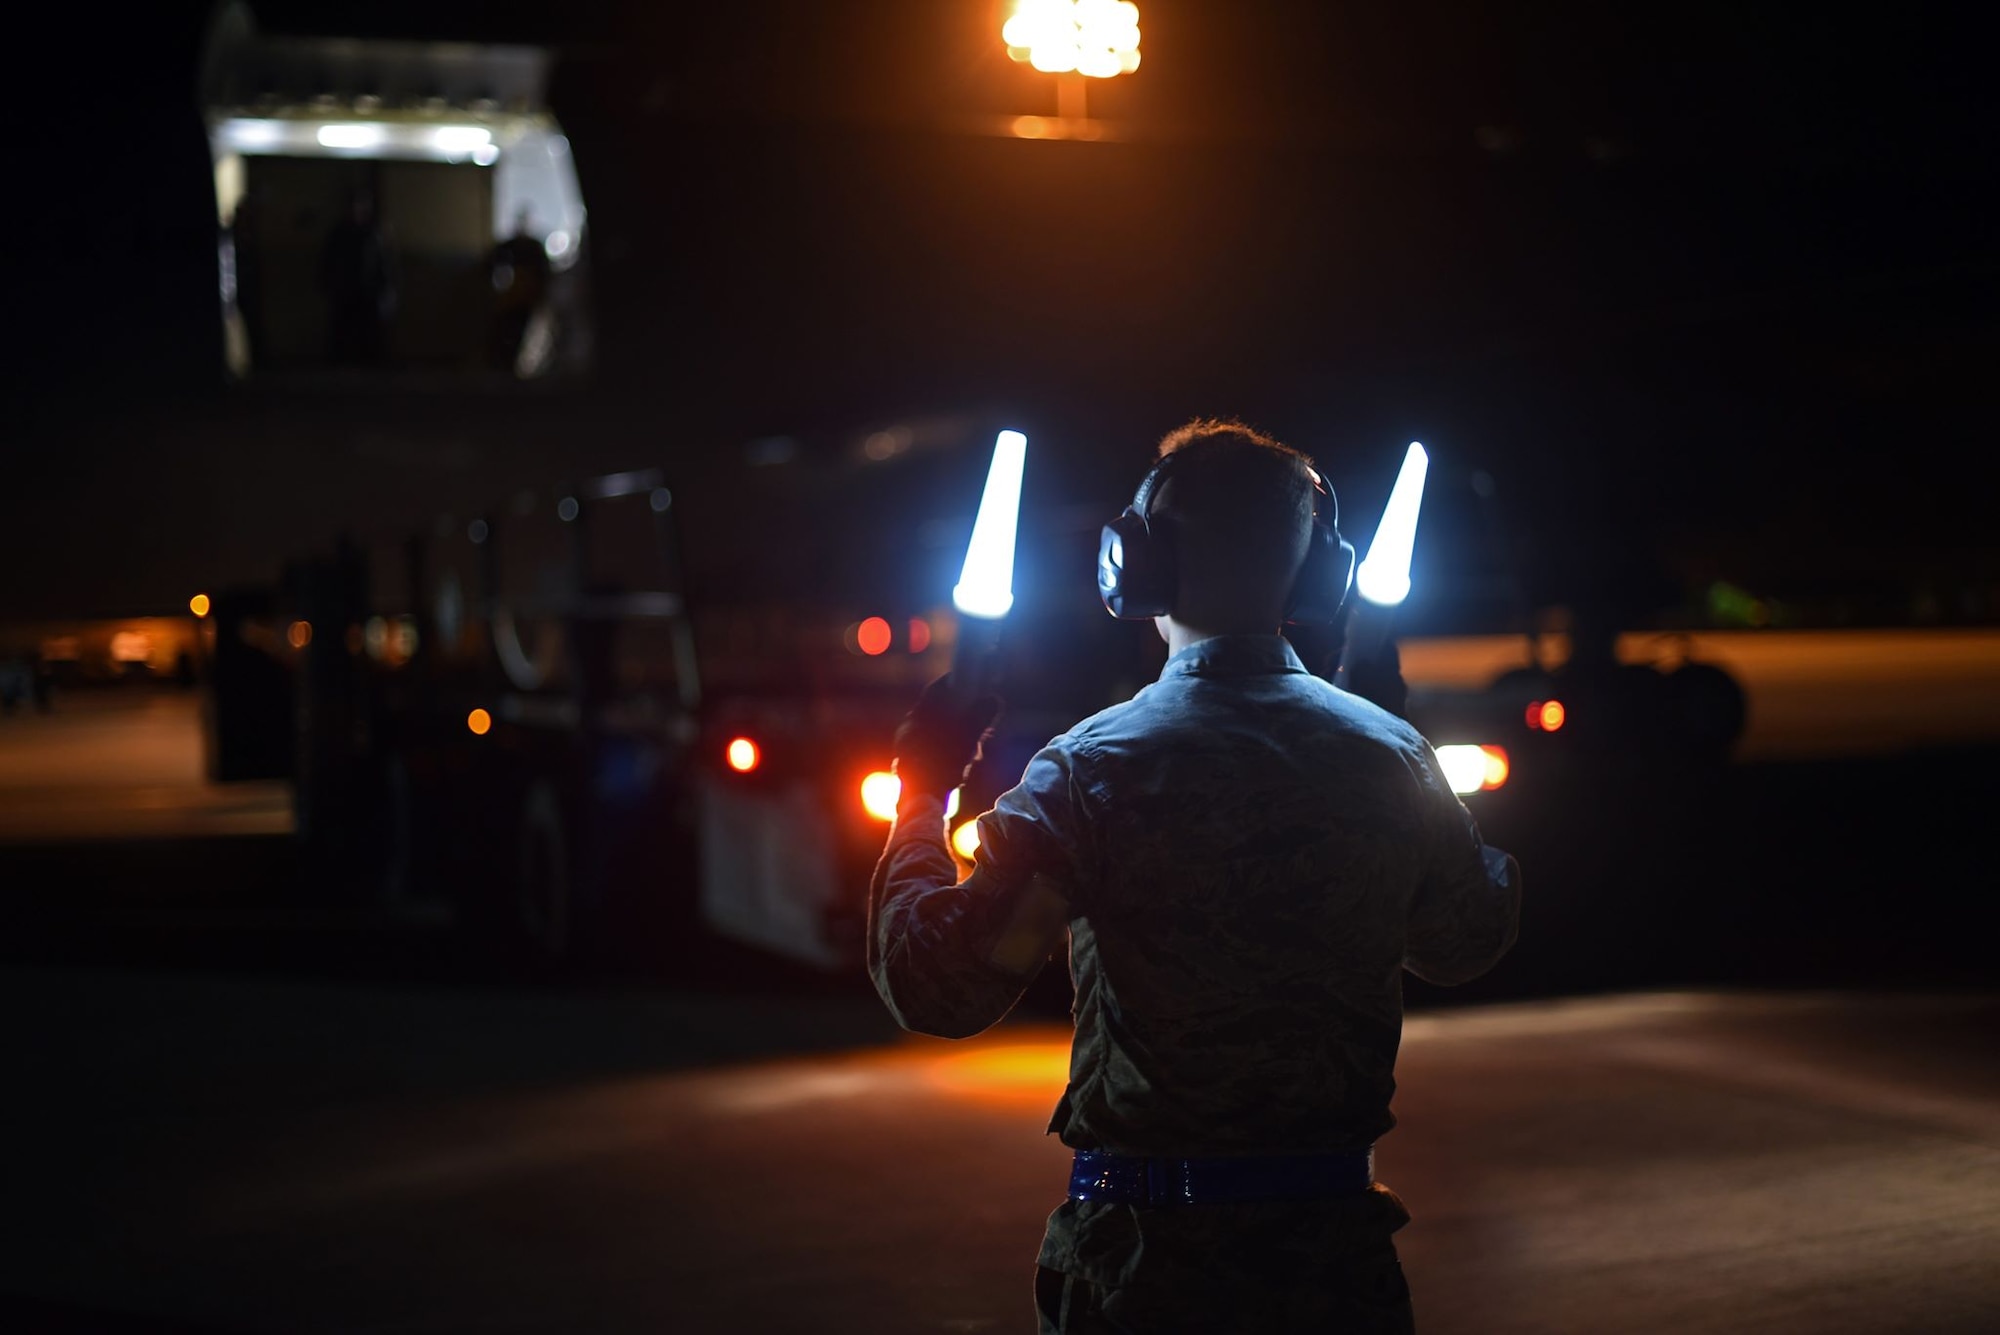 U.S. Air Force Airman Ryan Richardsson, 60th Aerial Port Squadron air transportation journeyman, directs a cargo-loading vehicle away from a McConnell Air Force Base, Kansas, KC-46 Pegasus Aug. 21, 2019, at Travis AFB, California. Richardson was part of the Travis AFB crew who met the visiting KC-46 and which mission it was to load life rafts and other cargo onto the aircraft for the U.S. Navy's USS Port Royal. (U.S. Air Force photo by Senior Airman Christian Conrad)